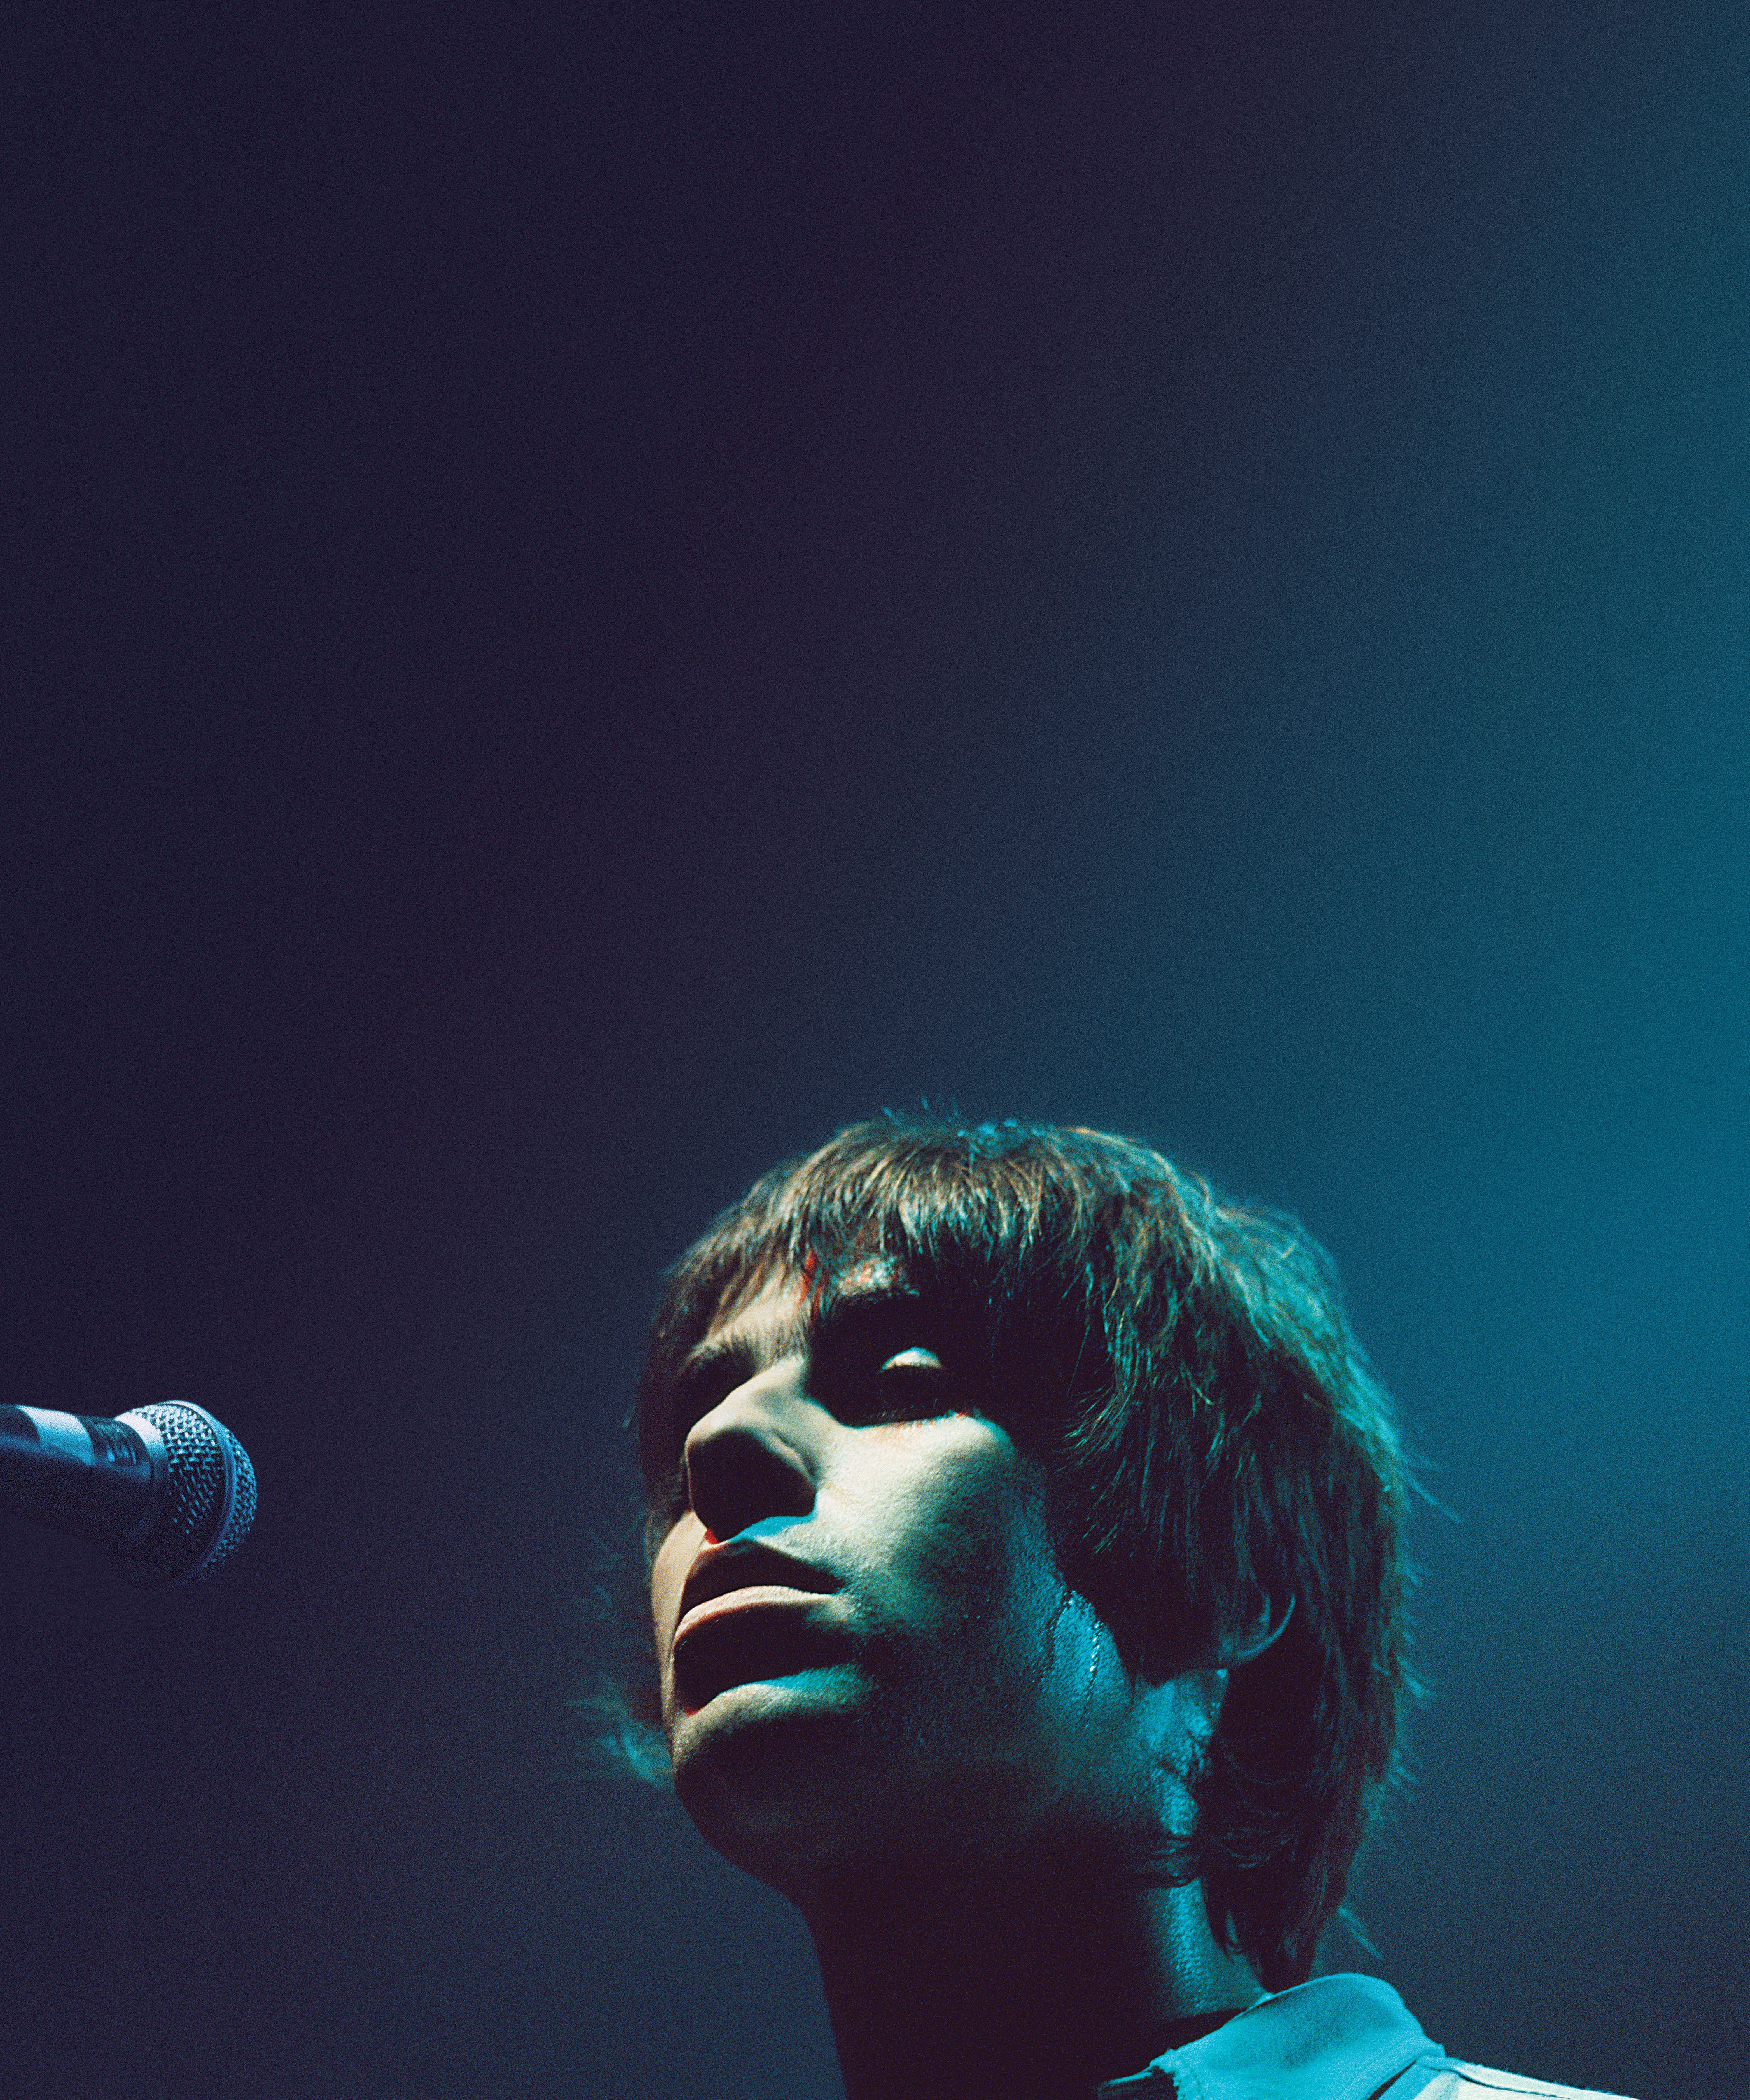 Liam Gallagher - Definitely Maybe 30 Years in Dublin promo photo for Three+ presale offer code